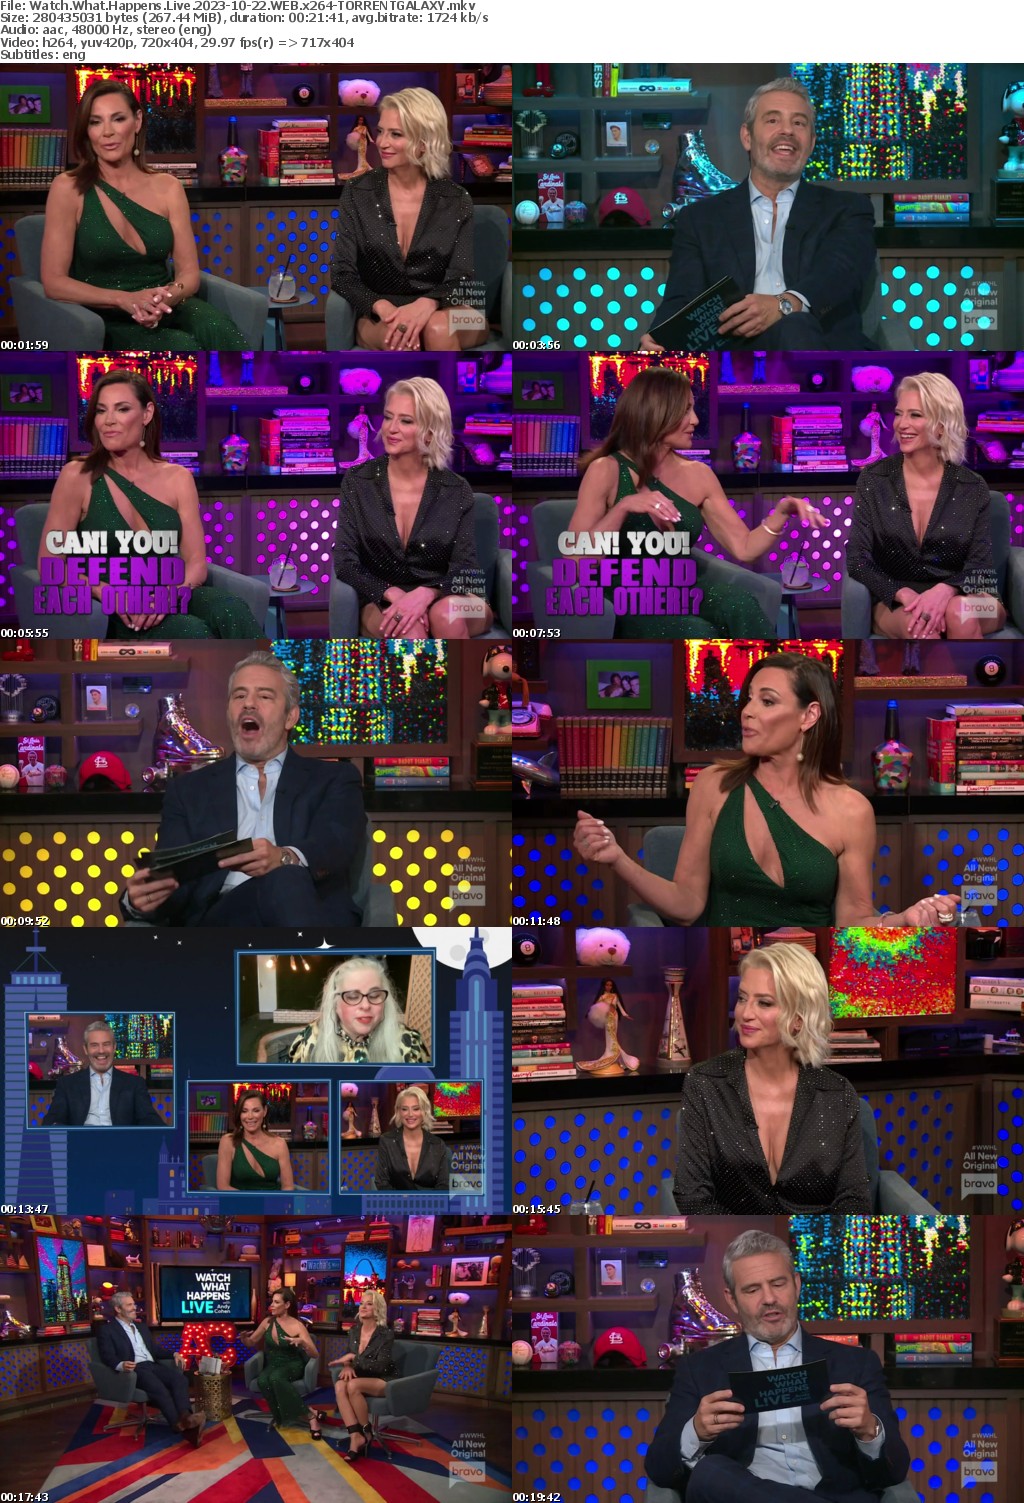 Watch What Happens Live 2023-10-22 WEB x264-GALAXY